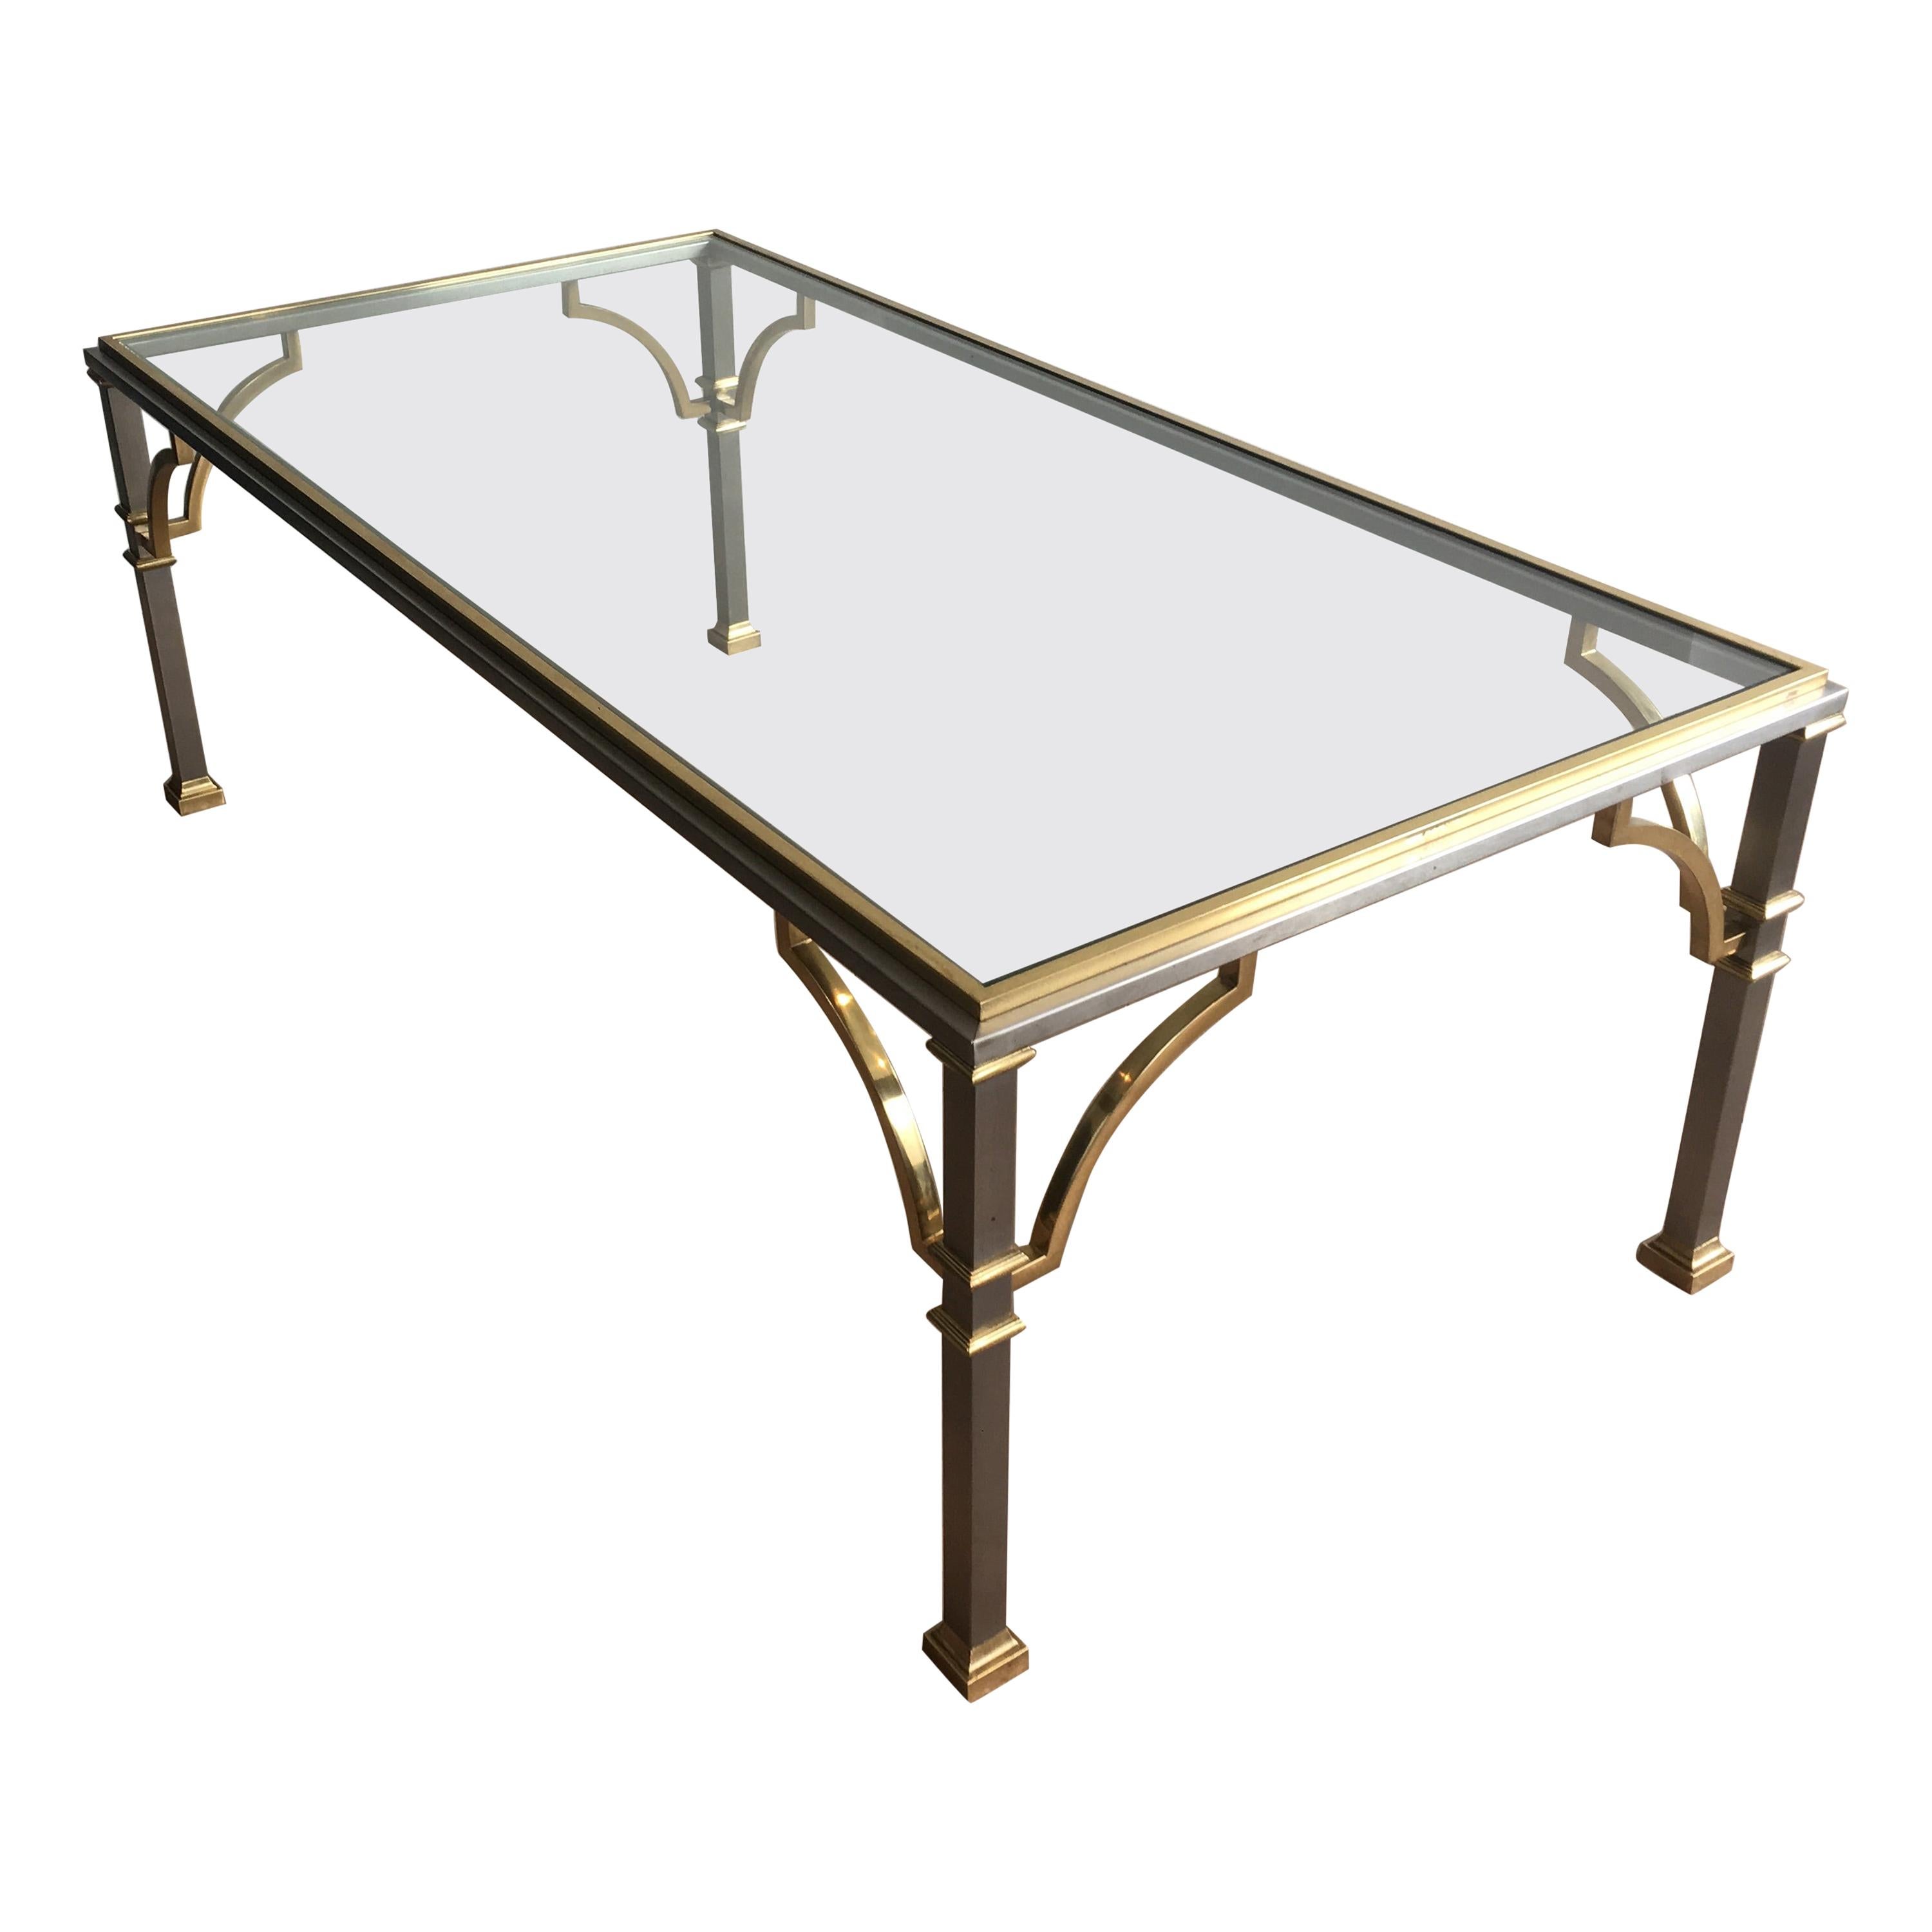 In the Style of Maison Jansen, Neoclassical Brushed Steel and Brass Coffee Table